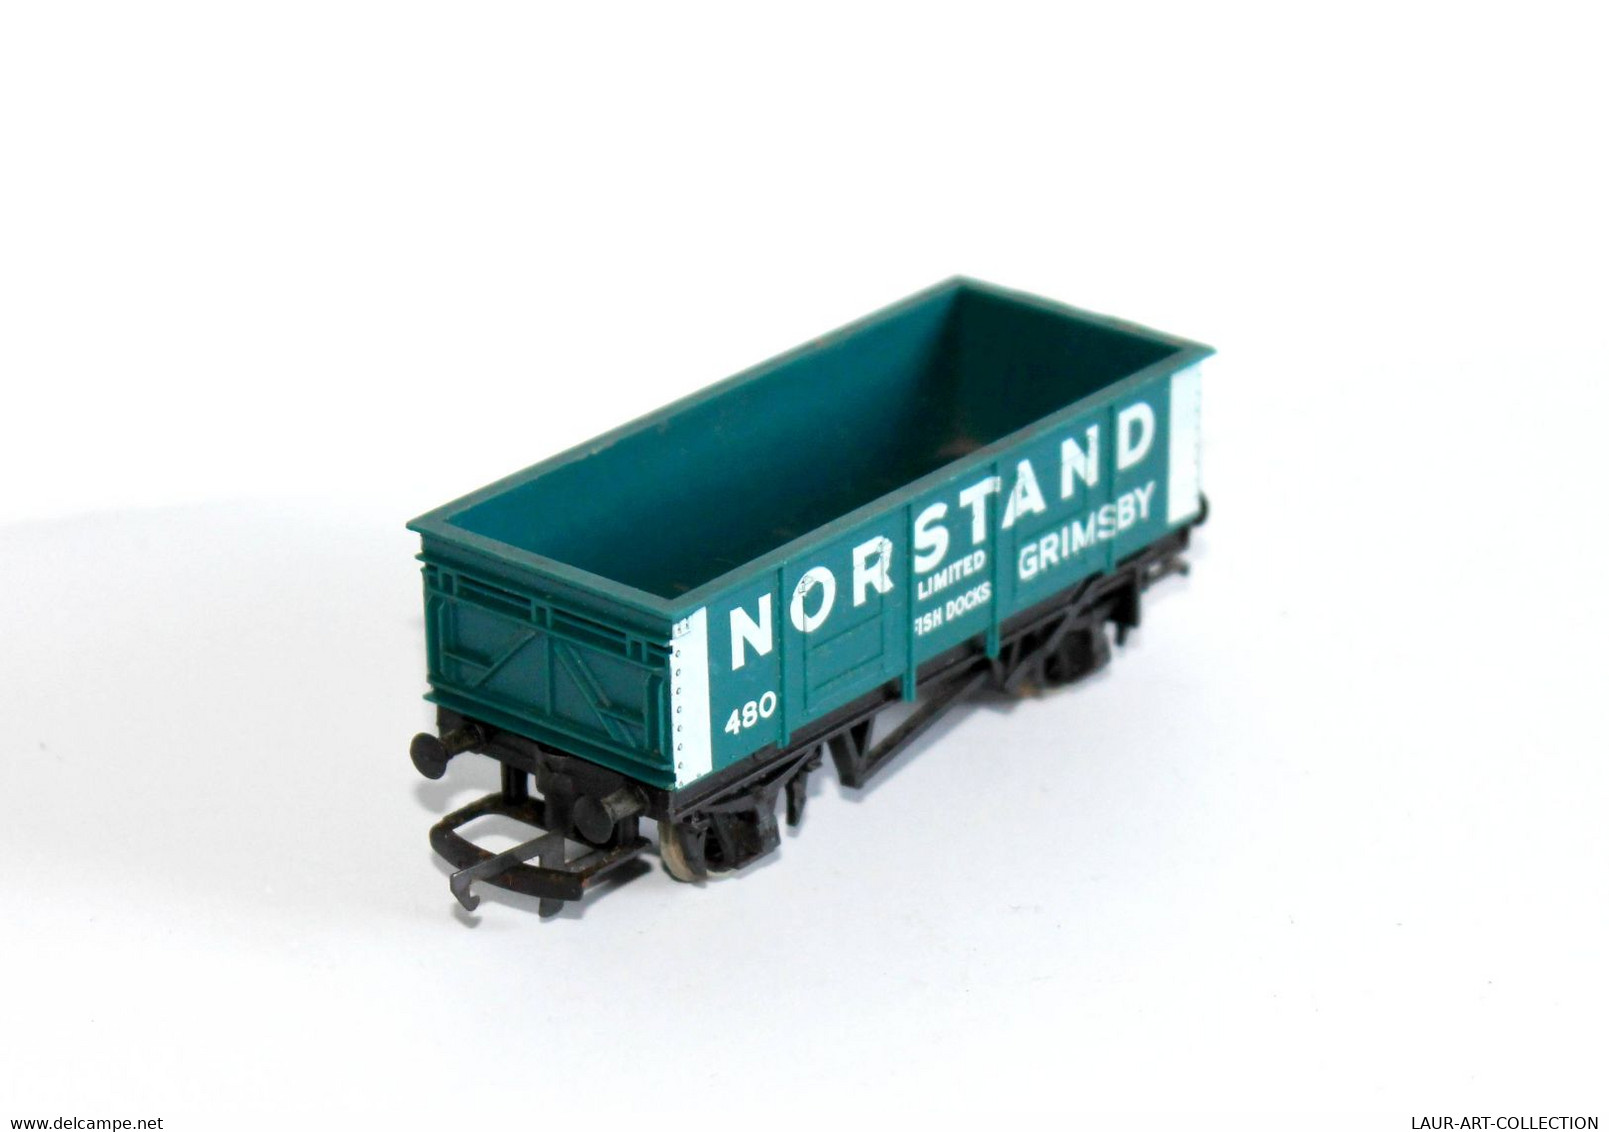 HORNBY RAILWAYS - WAGON TOMBEREAU MARCHANDISE - NORSTAND 480 GRIMSBY, FISH DOCK FERROVIAIRE TRAIN CHEMIN FER  (2304.106) - Wagons Marchandises